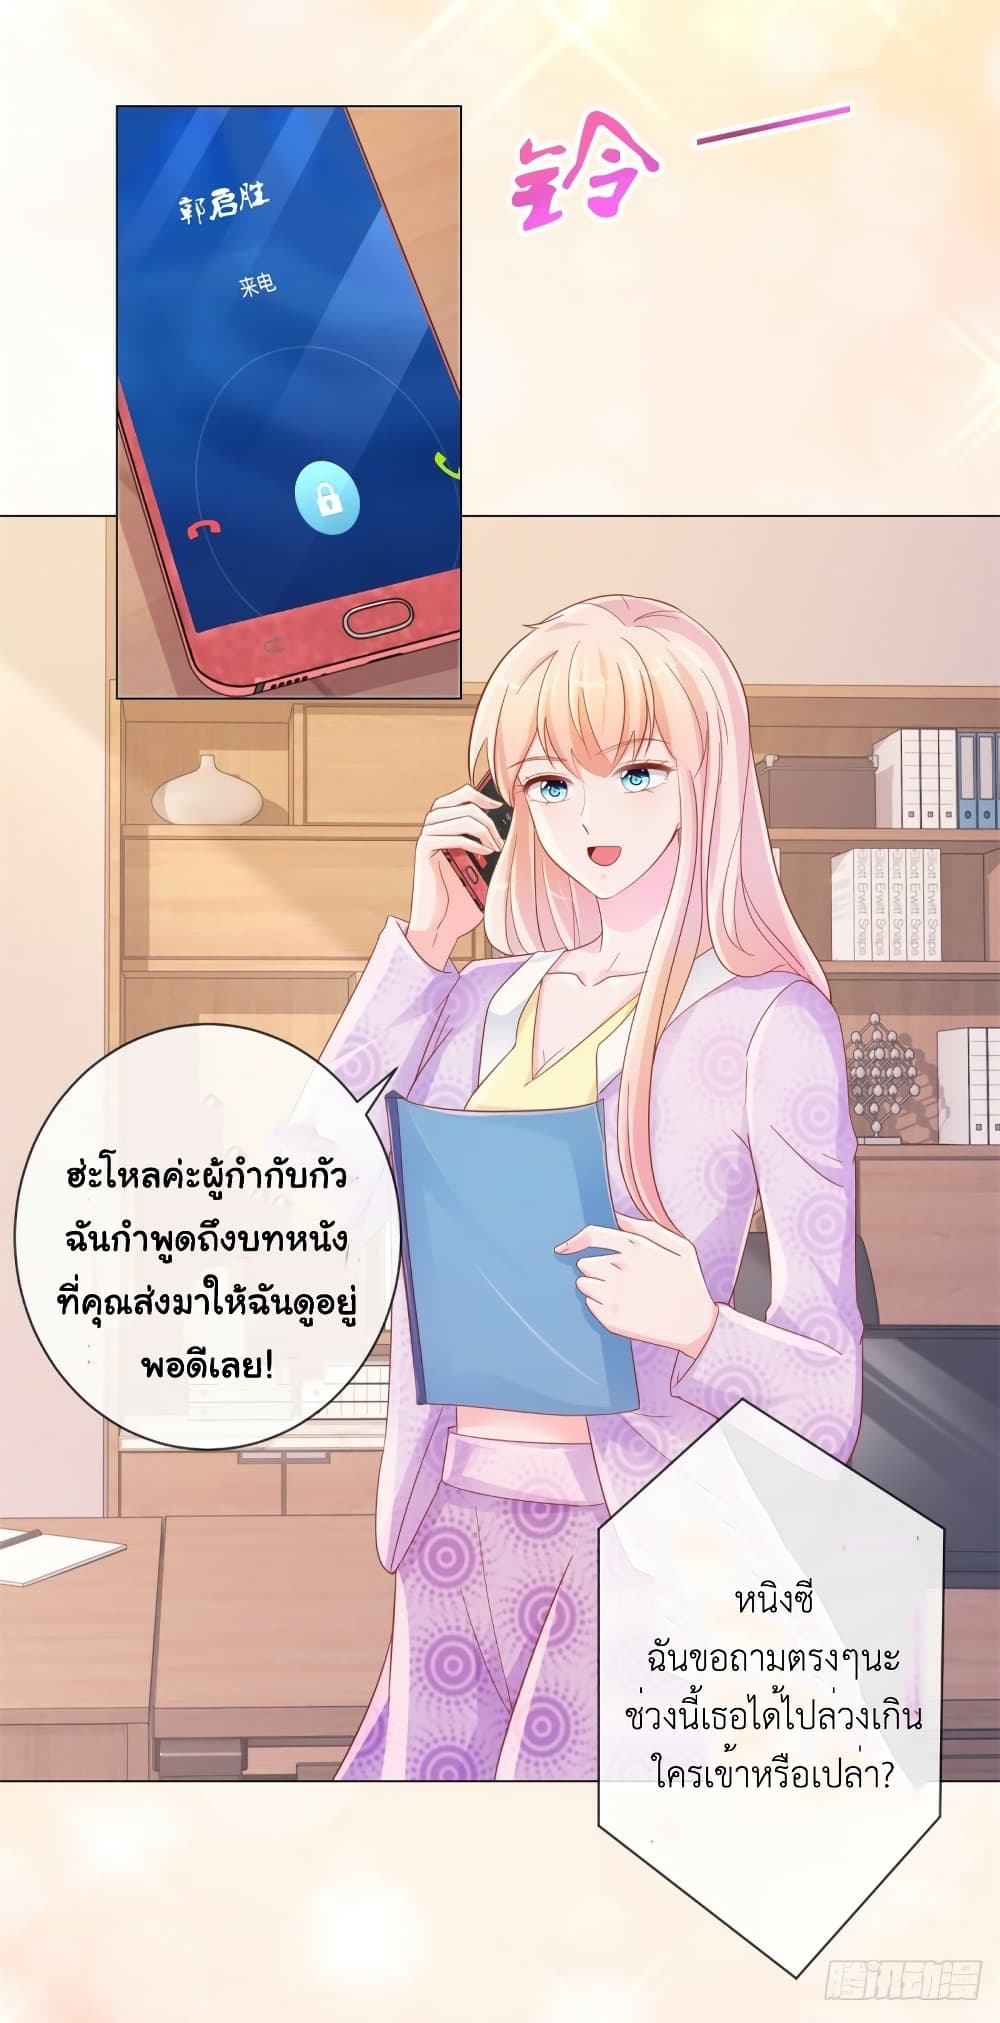 The Lovely Wife And Strange Marriage à¹à¸œà¸™à¸£à¸±à¸à¸¥à¸§à¸‡à¹ƒà¸ˆ 322 (13)